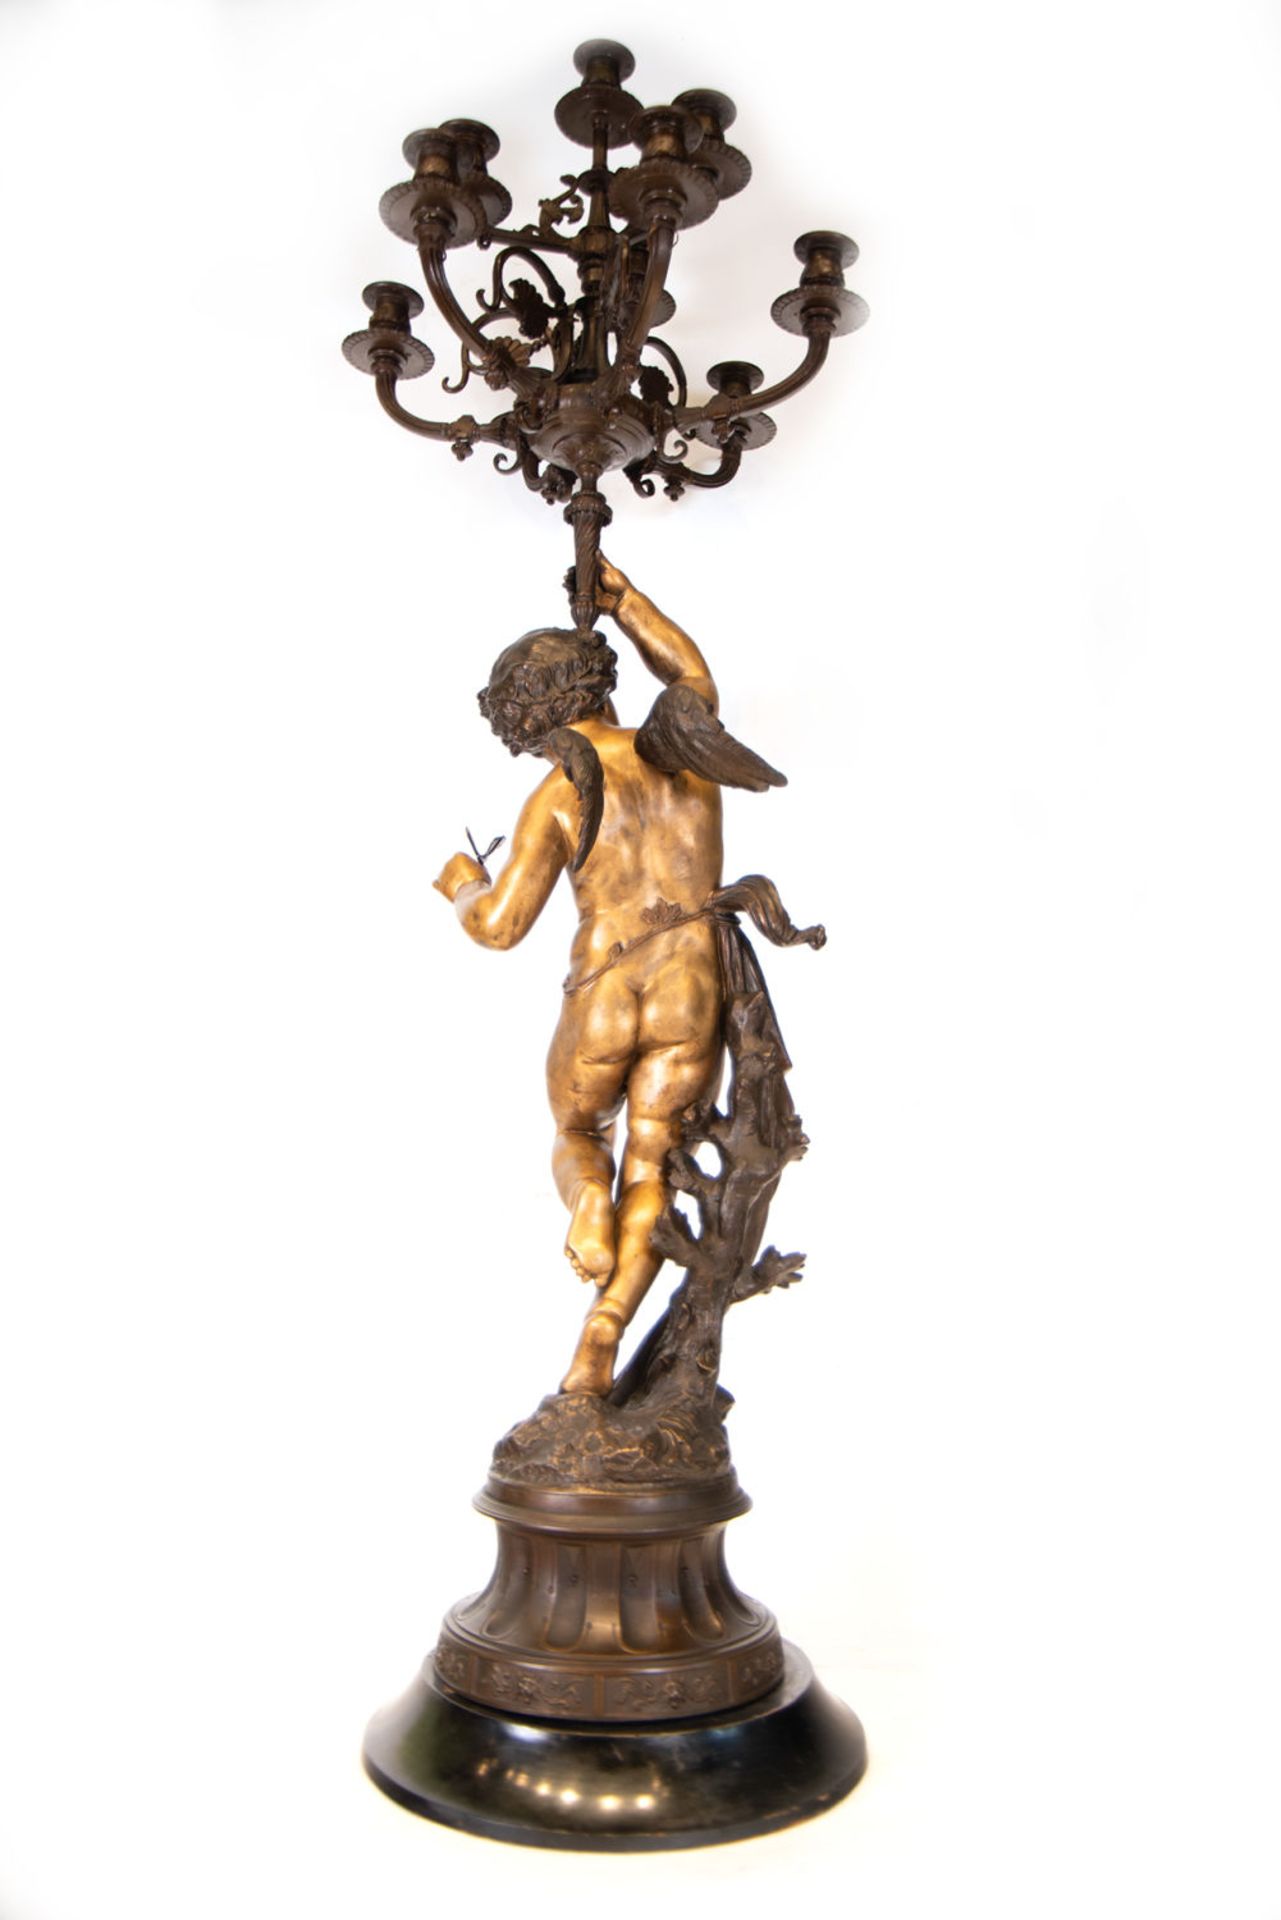 Massive Pair of French 19th Gilt Bronze Torcheres in the manner of Jean Baptiste Carpeaux NO RESERVE - Image 4 of 9